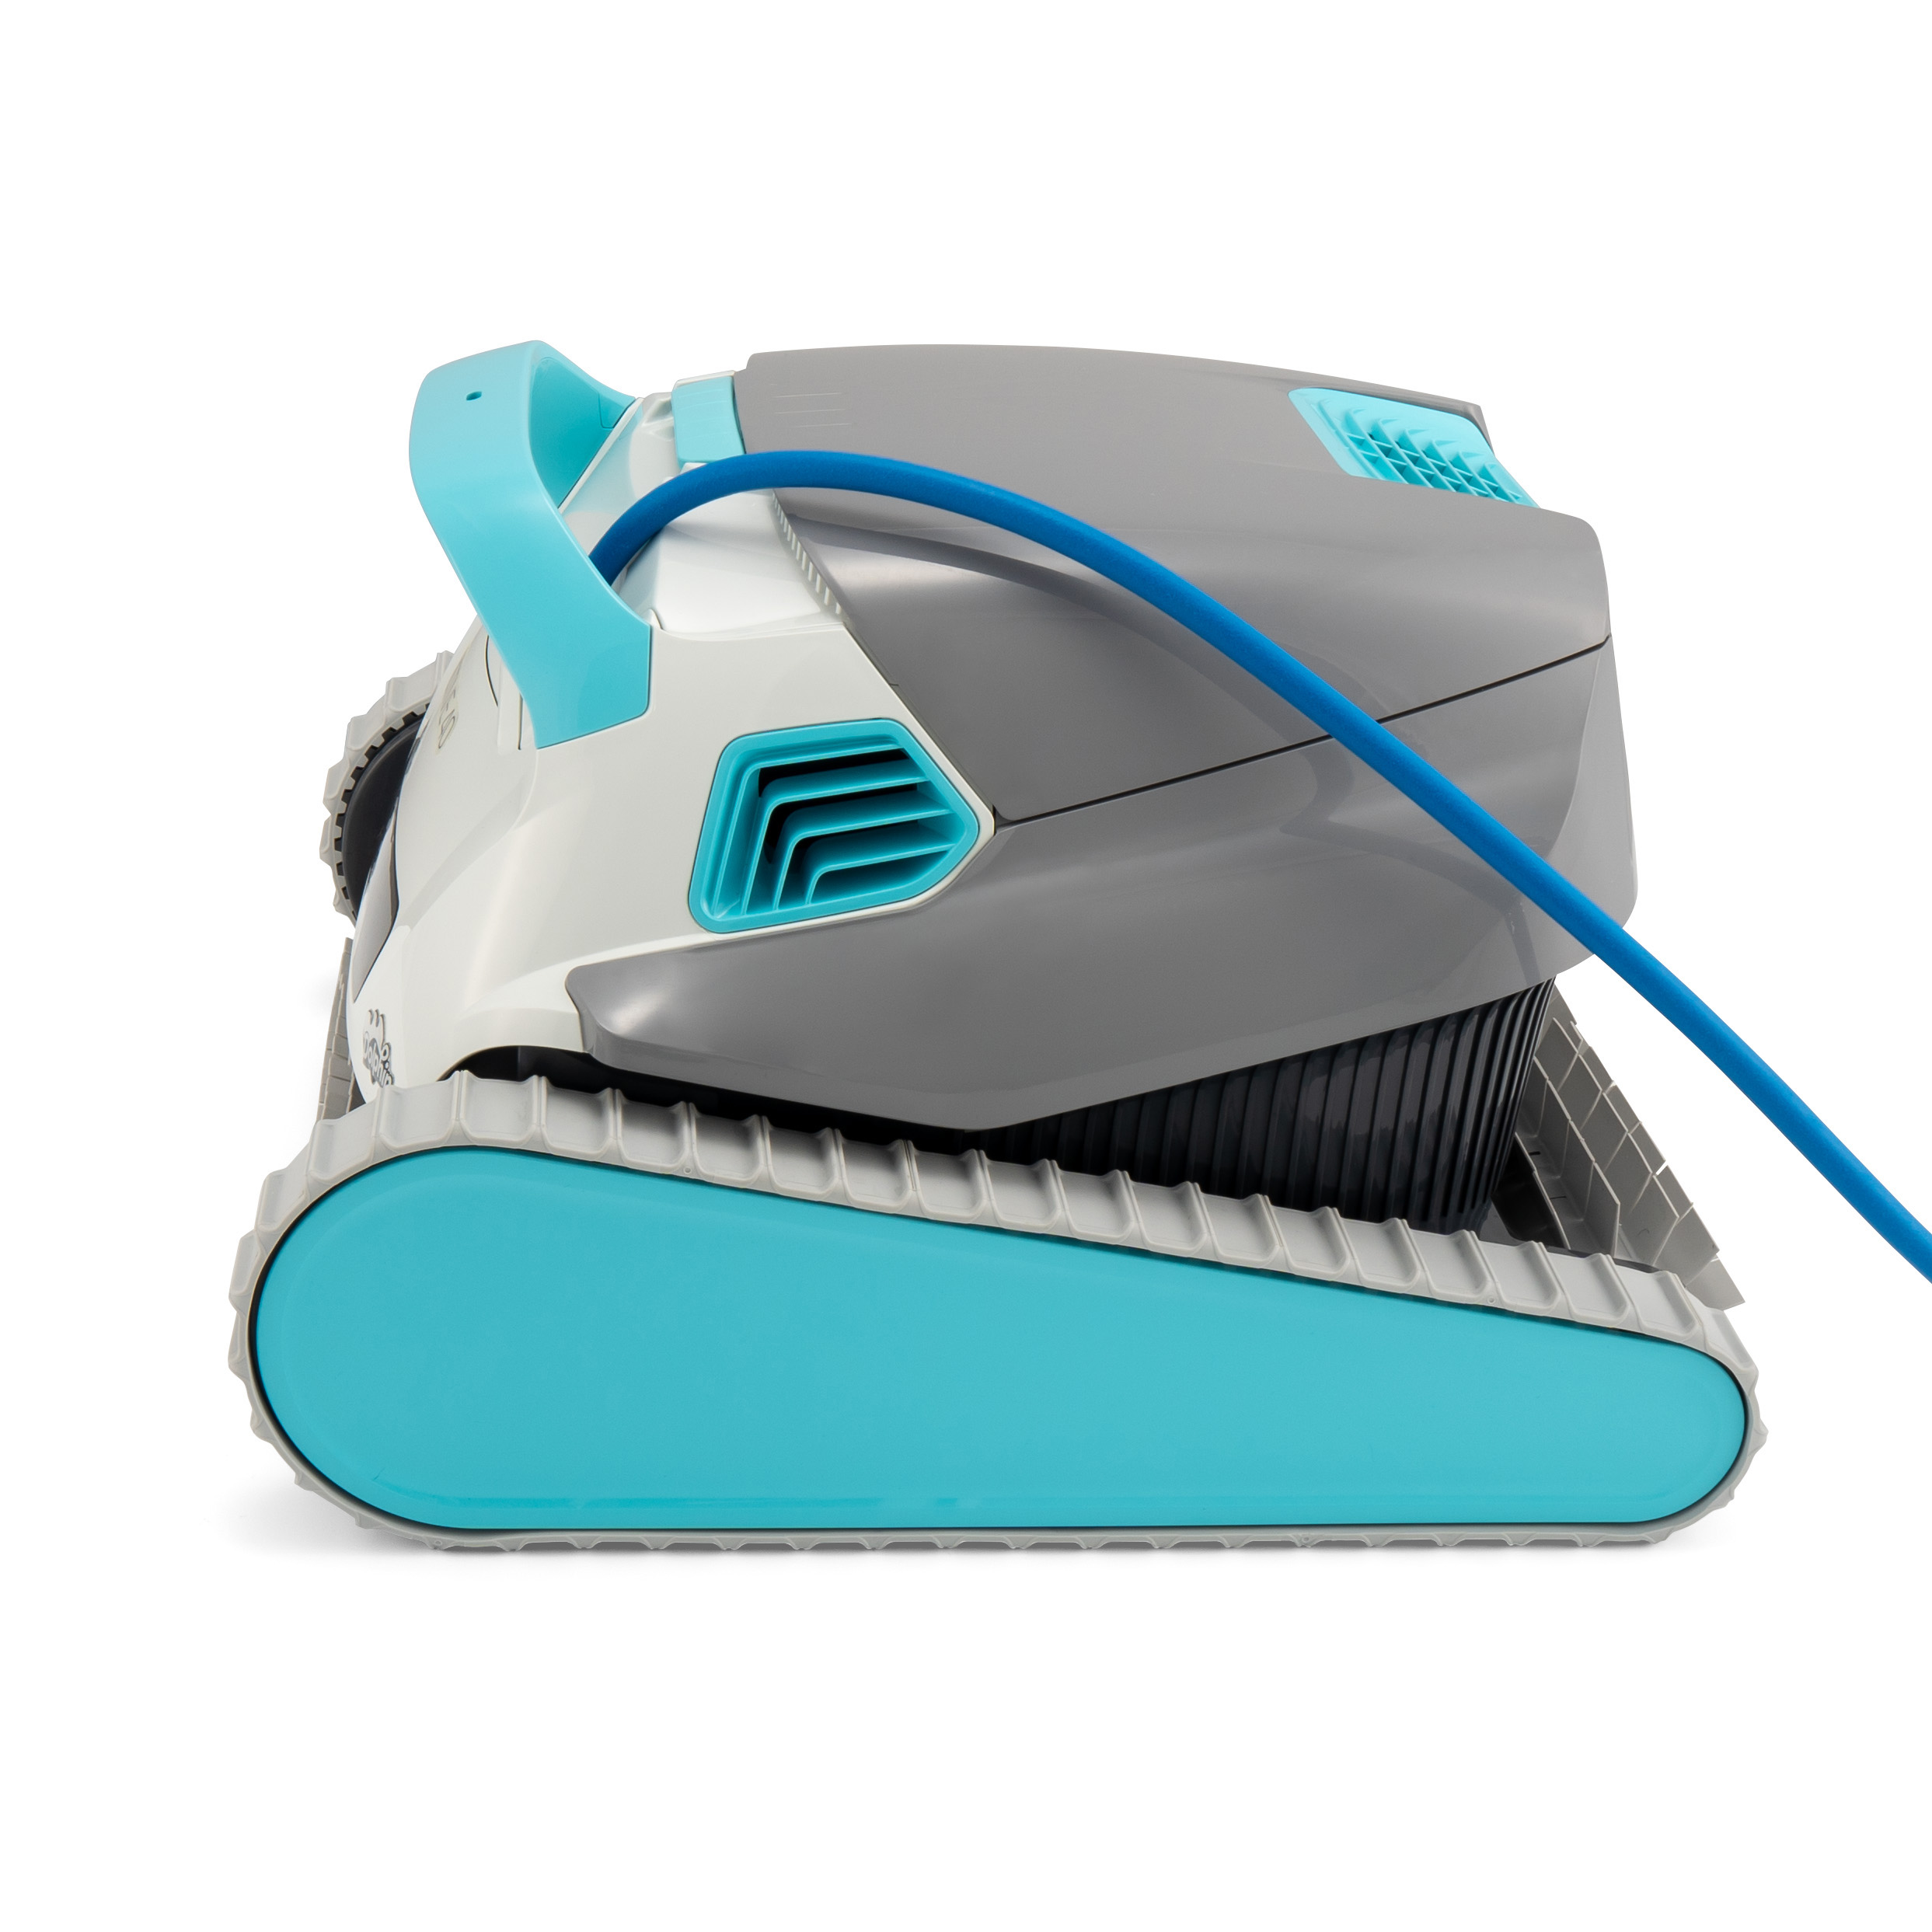 ACTIVE 40 DOLPHIN IG CLEANER